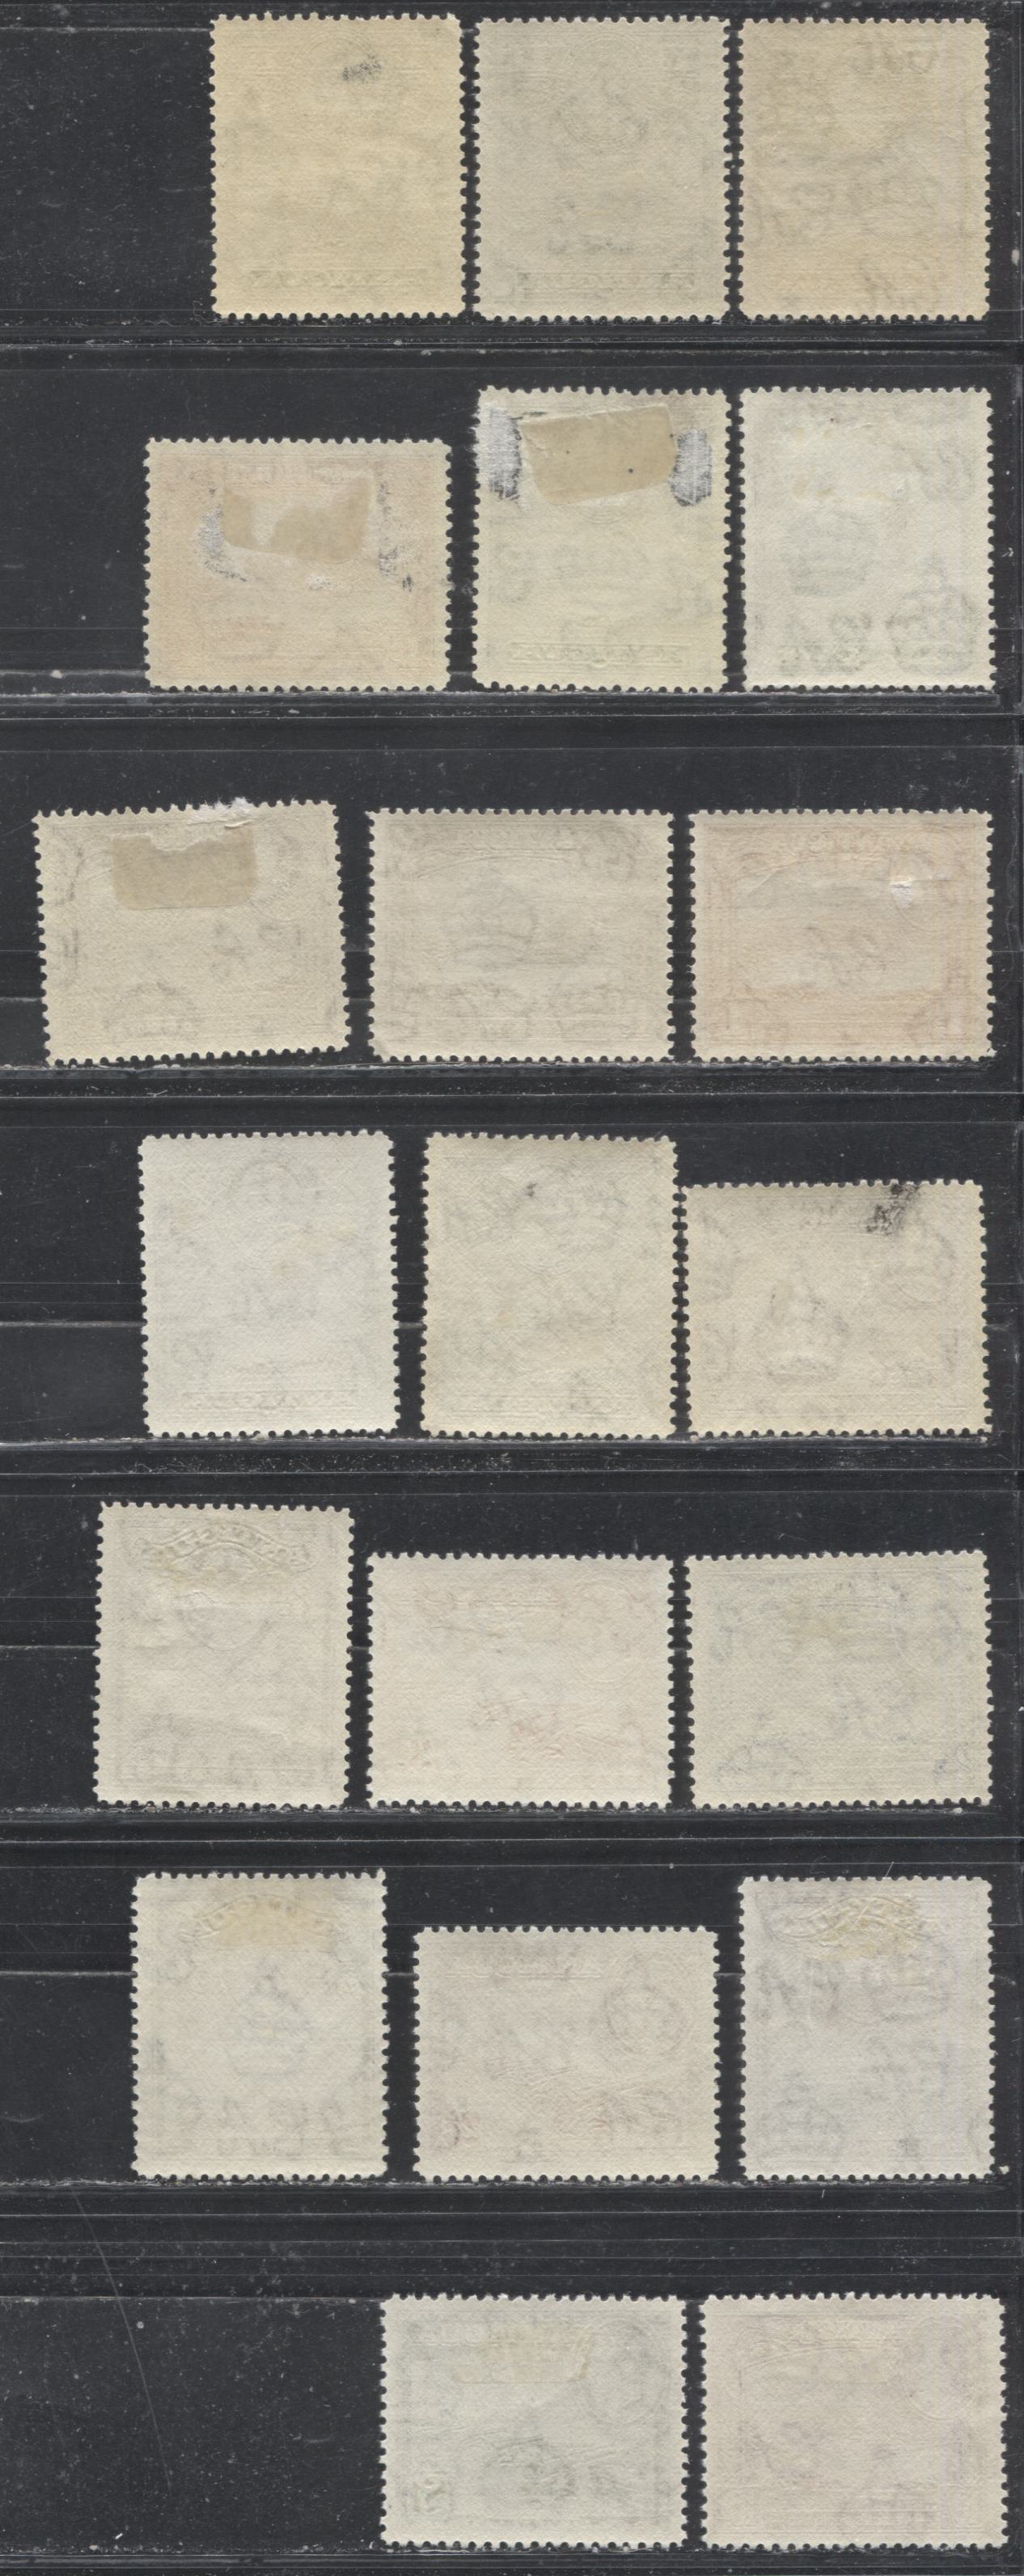 Antigua SG#98-109, 99a, 100a 1938-1952 Pictorial Definitive Issue, a F/VF LH Complete Set With Additional Printings and Most Listed Shades